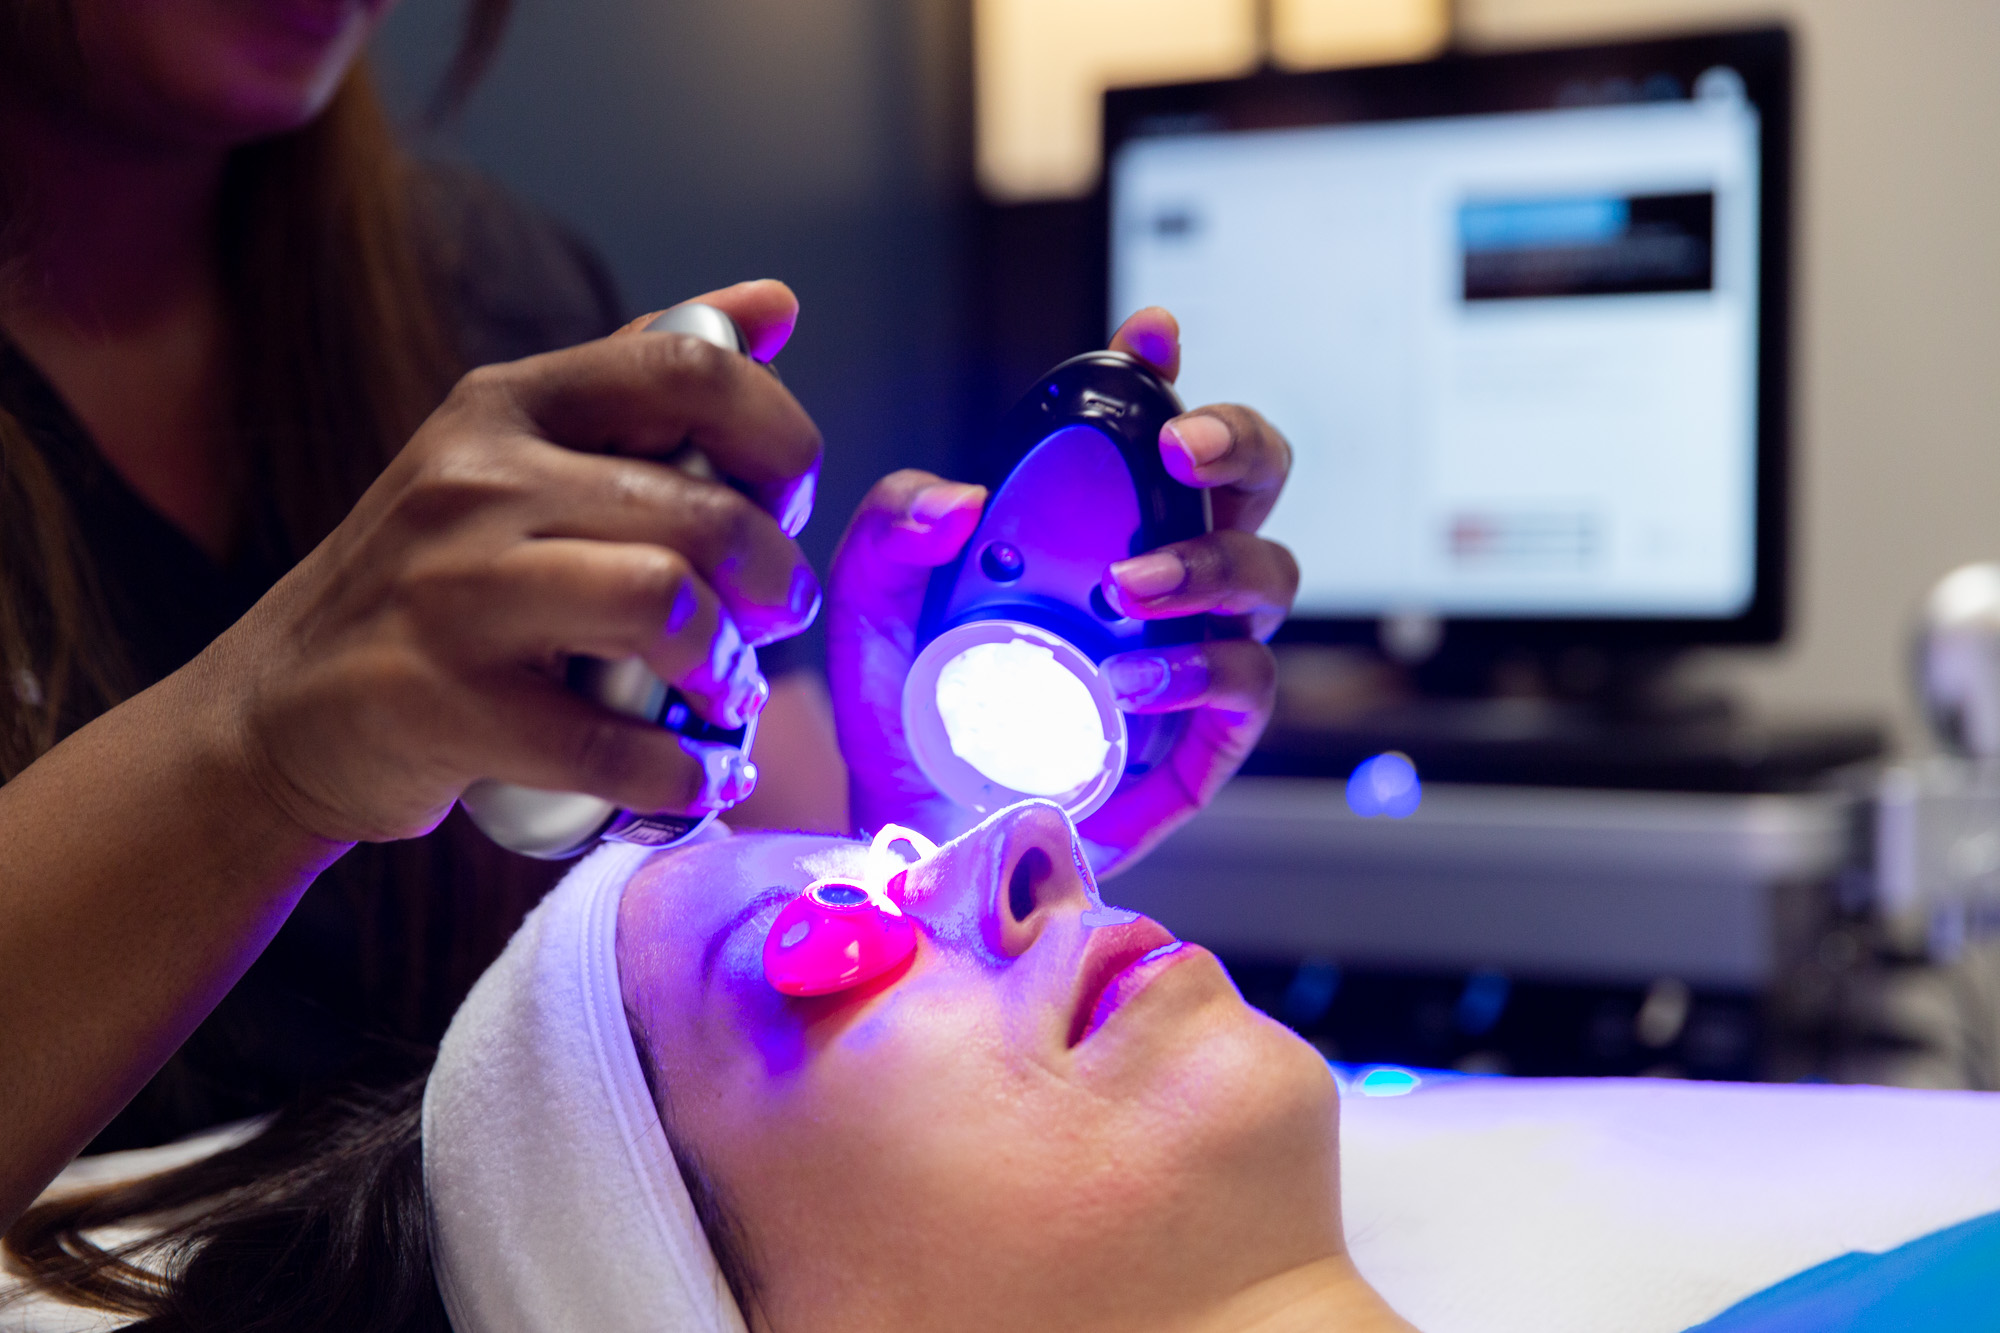 A Marcos Medical provider holds two handheld lights up to a female client's face during a HydraFacial. The client is wearing eye shields while laying down. A towel keeps her hair out of her face.